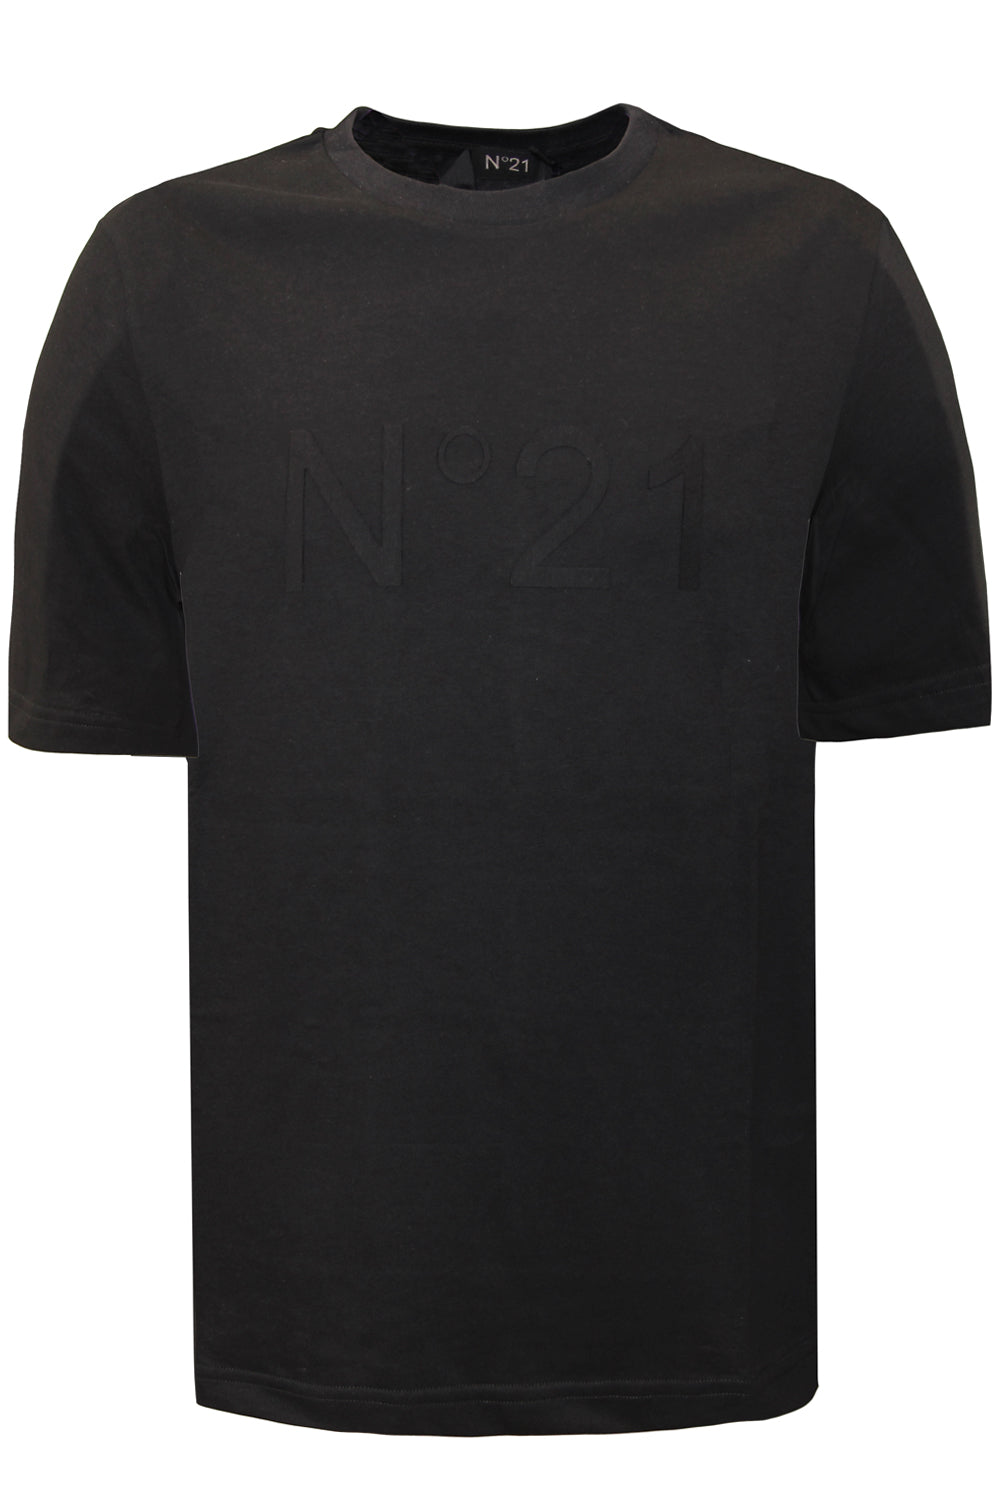 Image of N21 T-shirt con applicazione